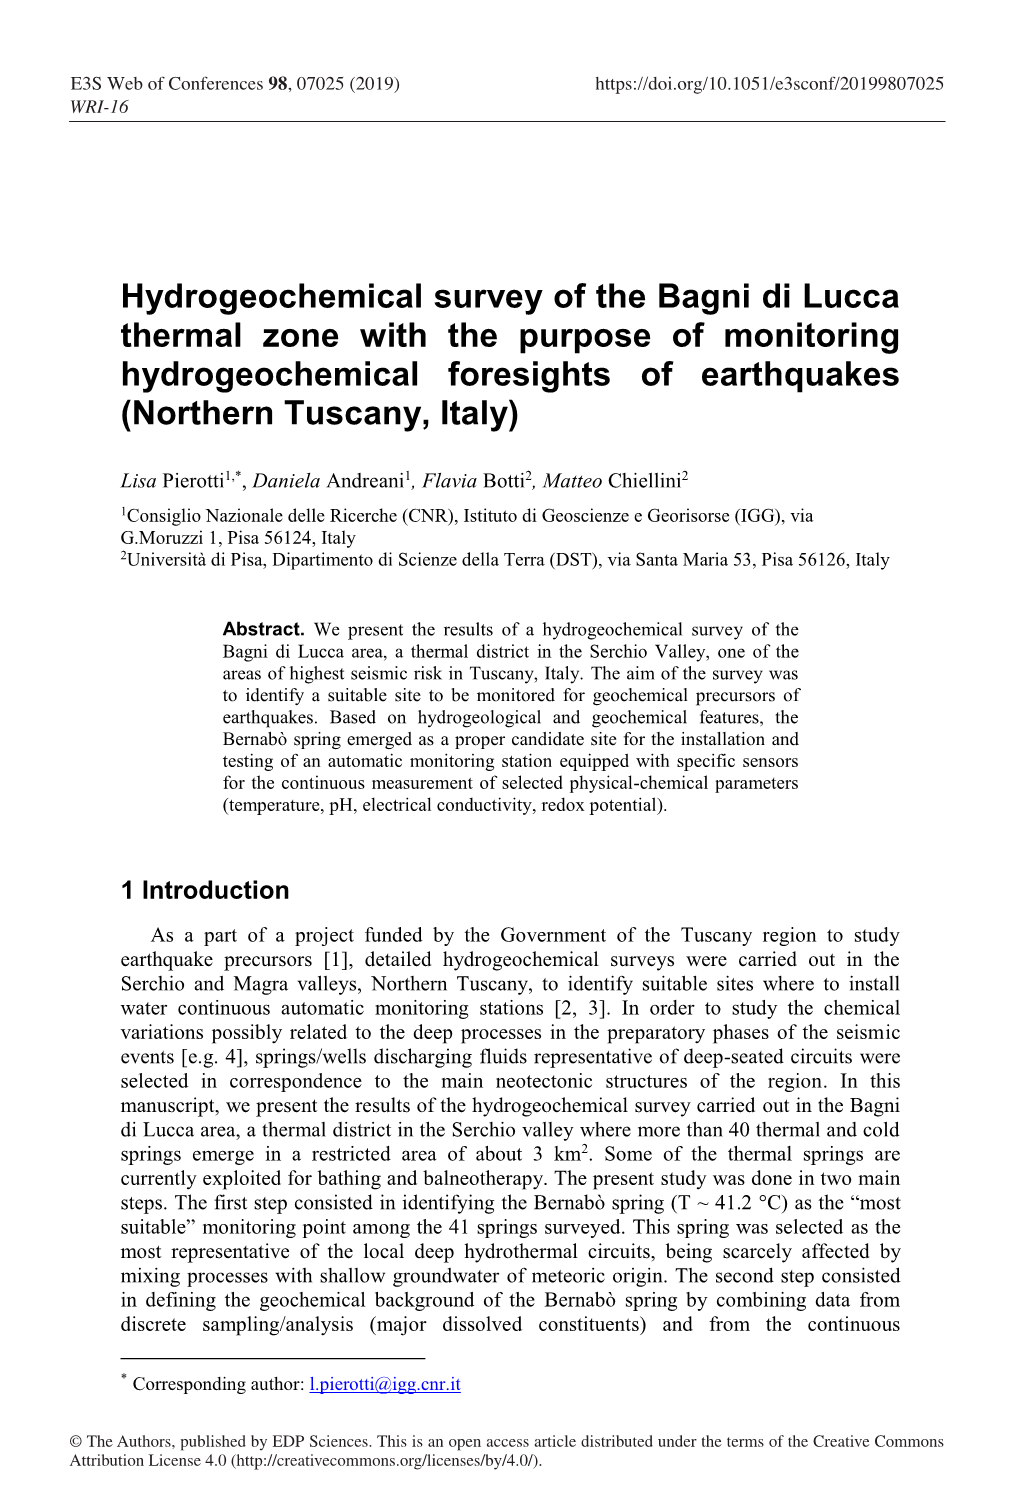 Hydrogeochemical Survey of the Bagni Di Lucca Thermal Zone with the Purpose of Monitoring Hydrogeochemical Foresights of Earthquakes (Northern Tuscany, Italy)